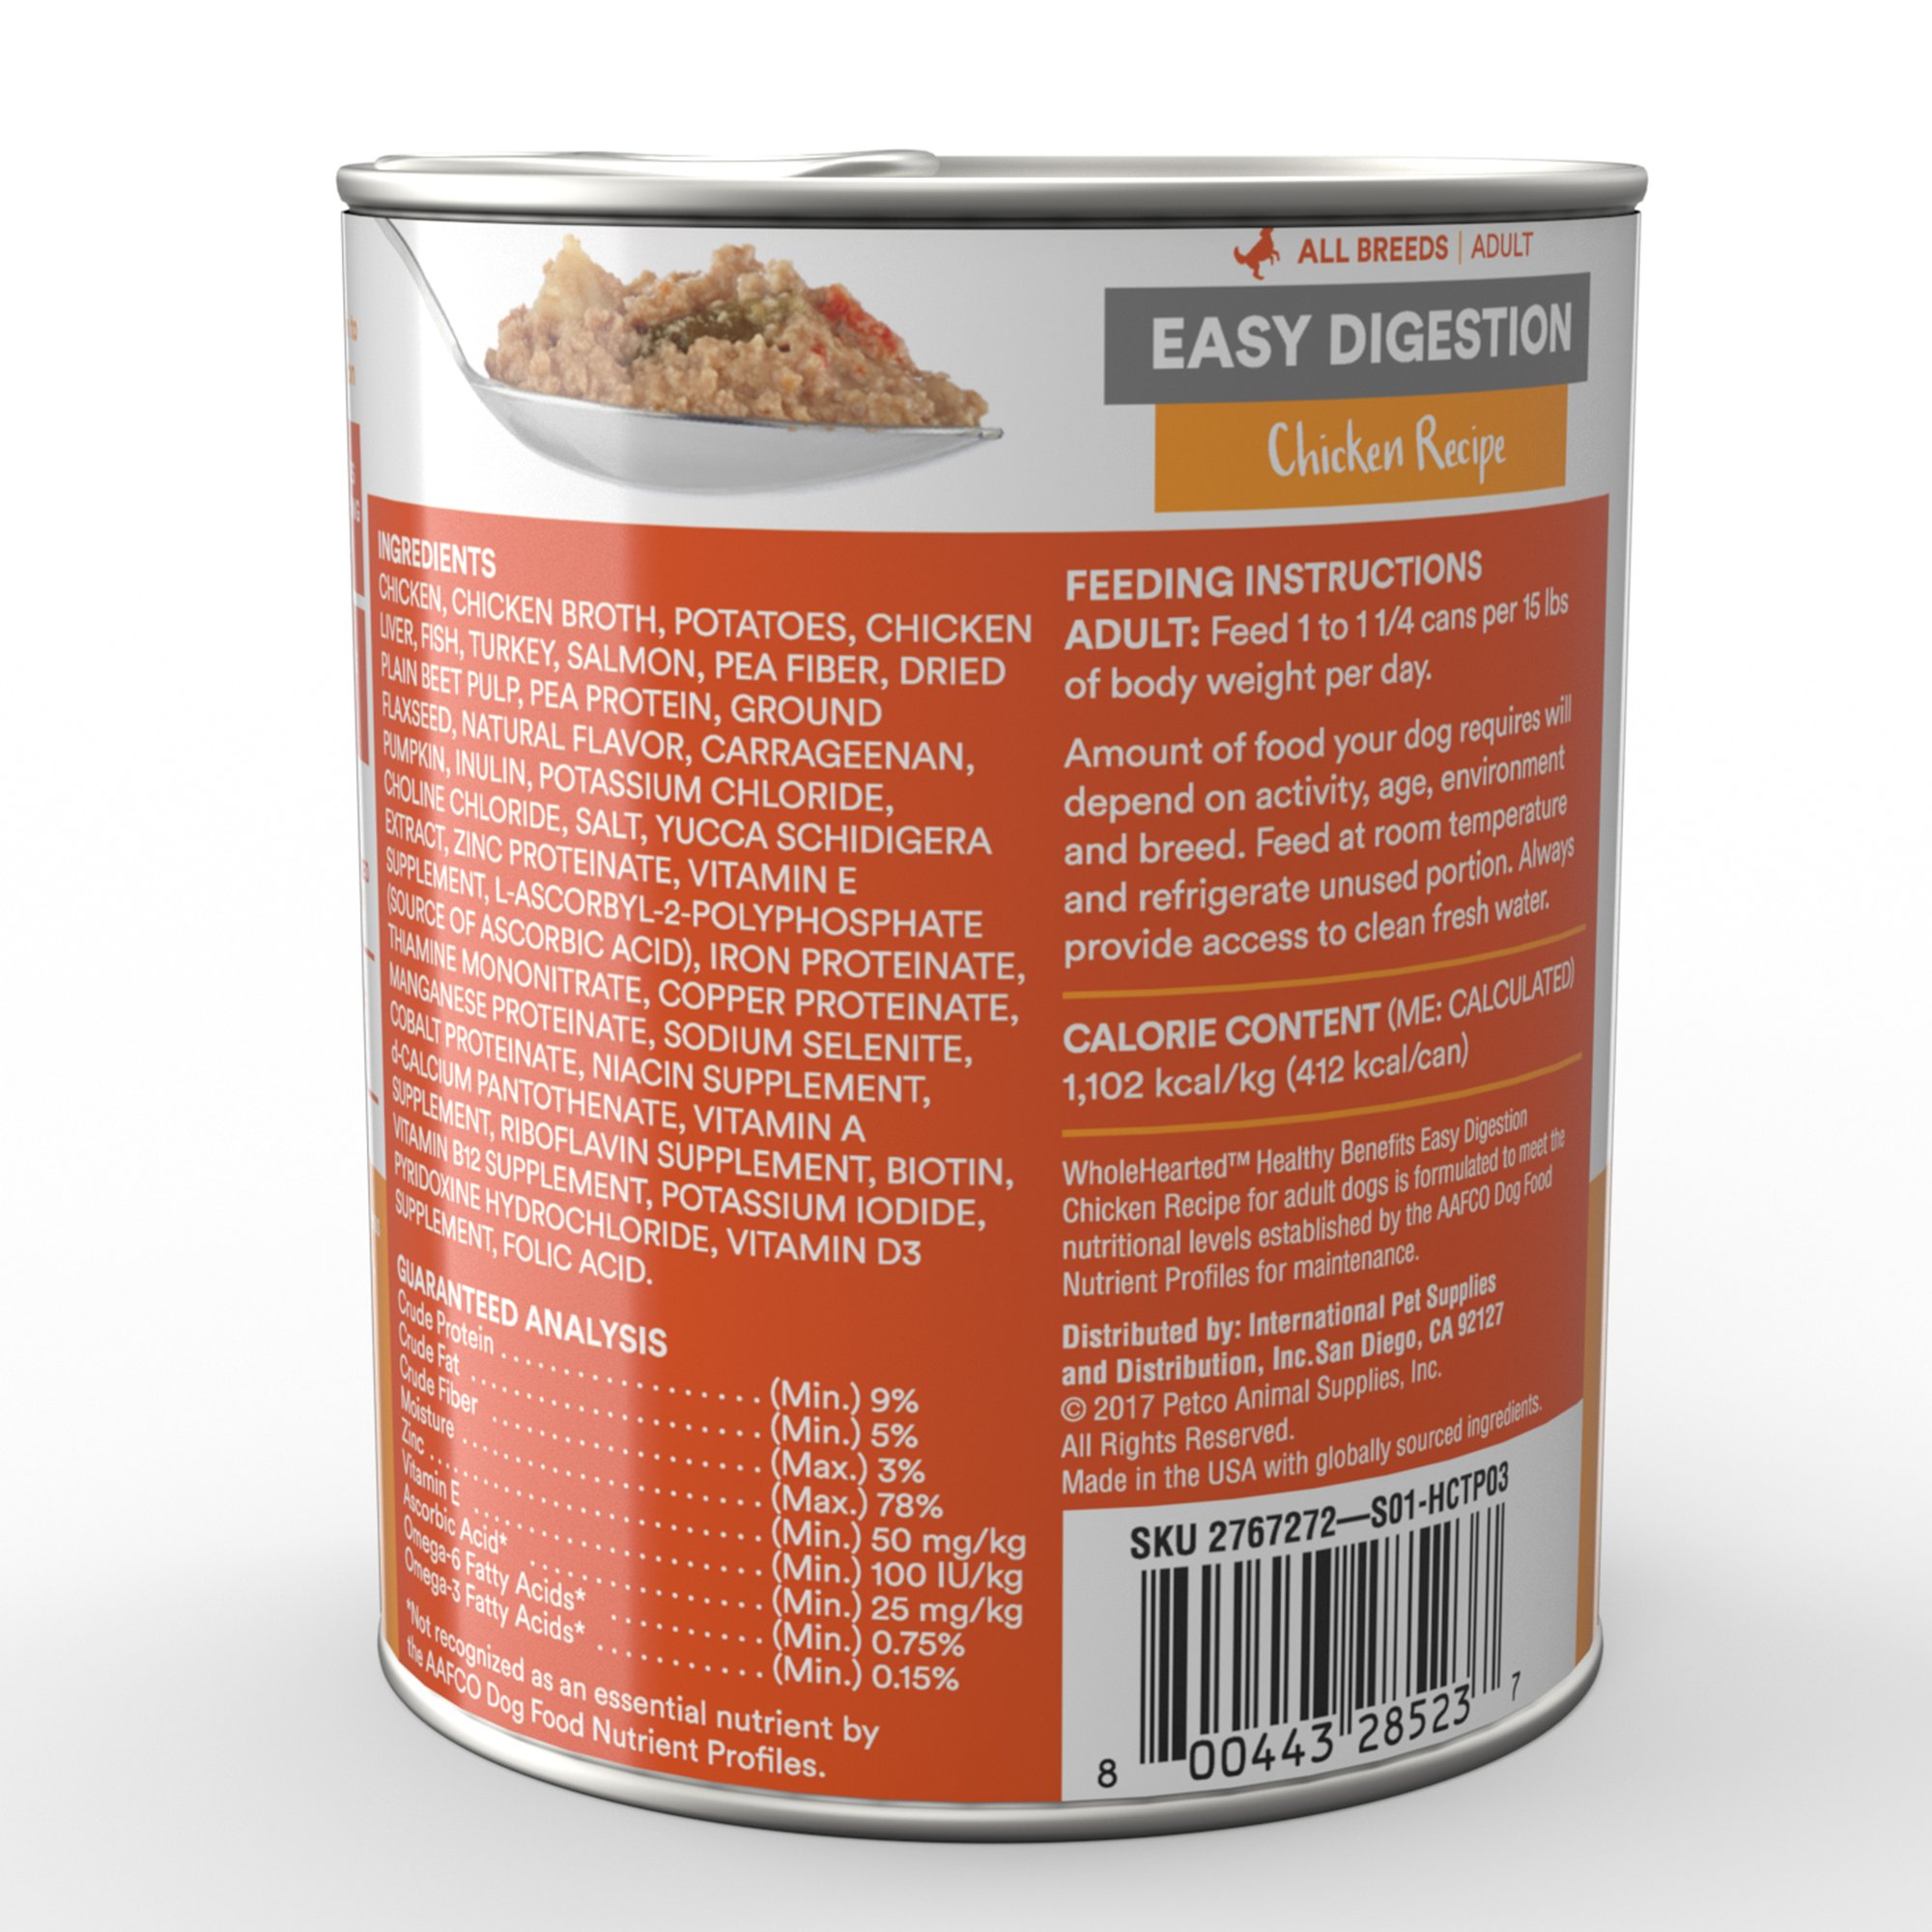 WholeHearted Easy Digestion Chicken Recipe Wet Dog Food | eBay